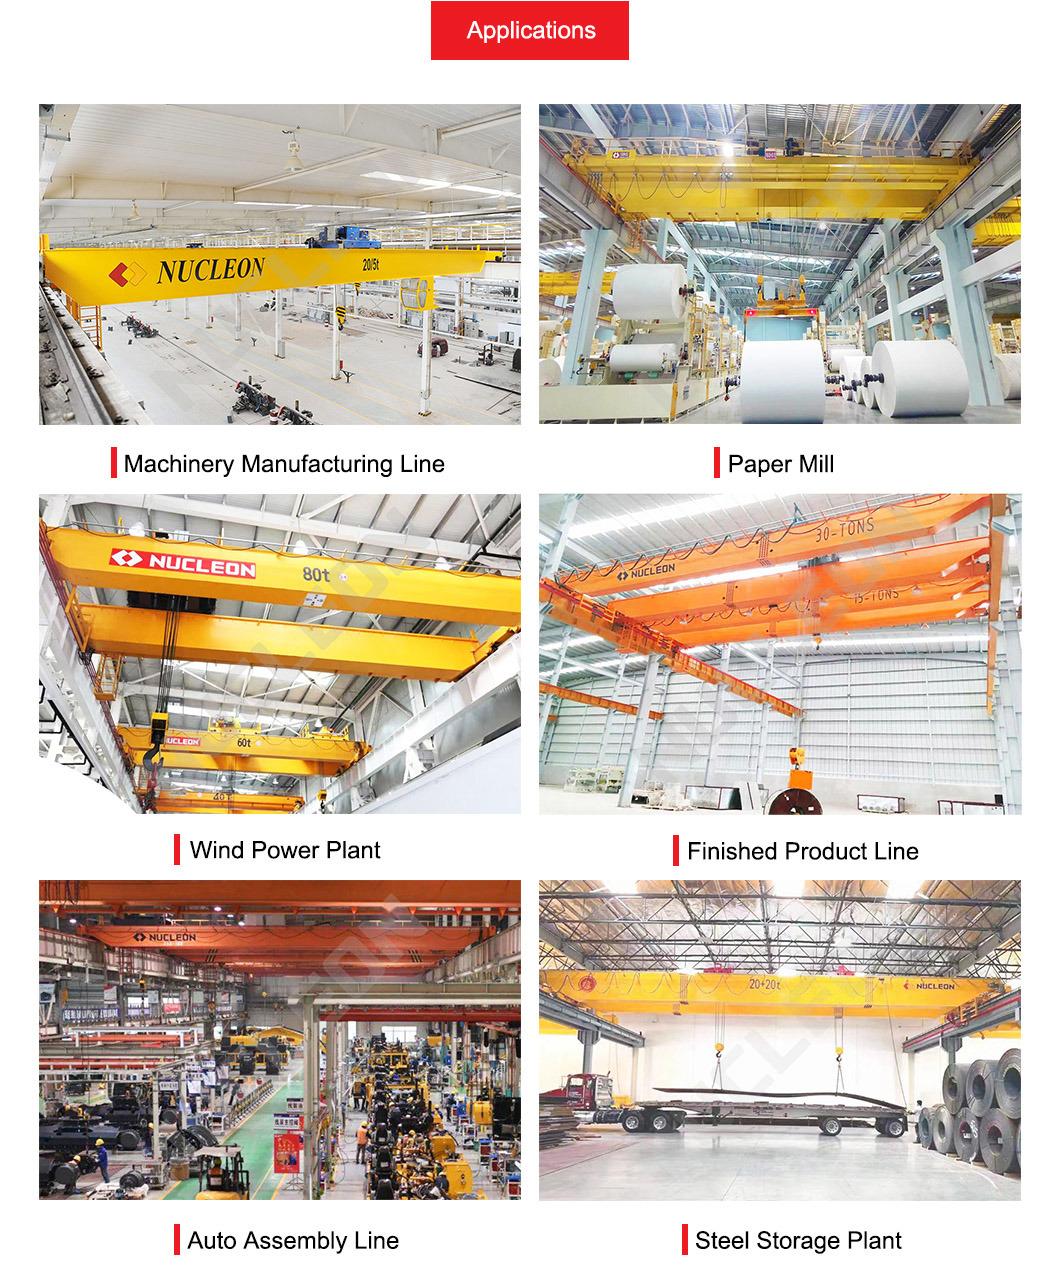 Nucleon High Performance 30t Double Girder Eot Crane with Coil Tong for Steel Coil Handling